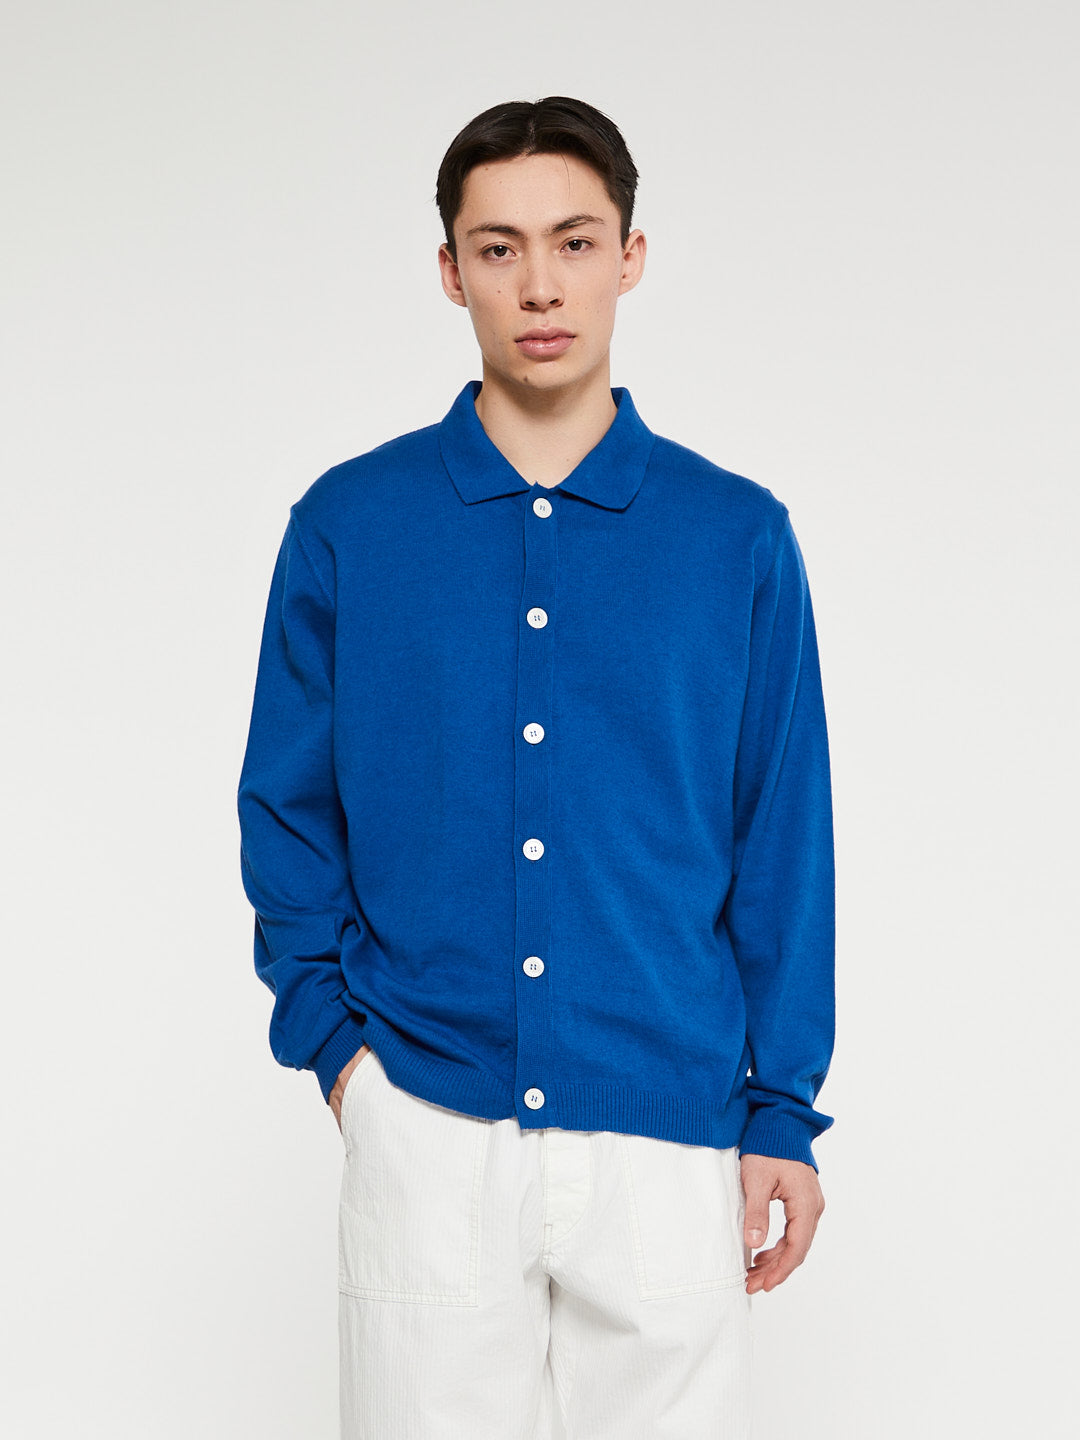 Another Aspect - Another Shirt 6.0 in Royal Blue